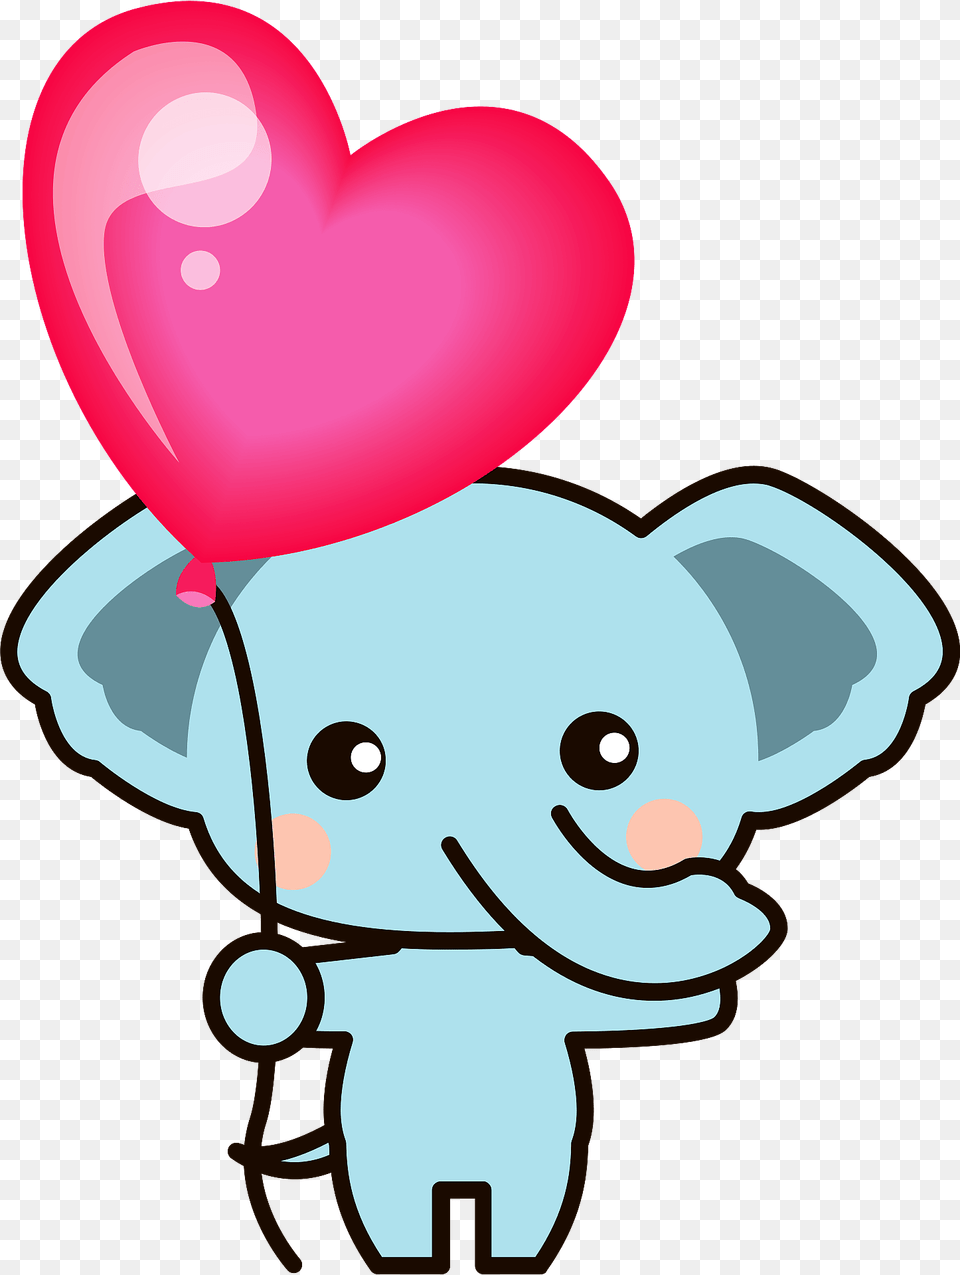 Elephant Is With Heart Shaped Balloon Clipart Free Png